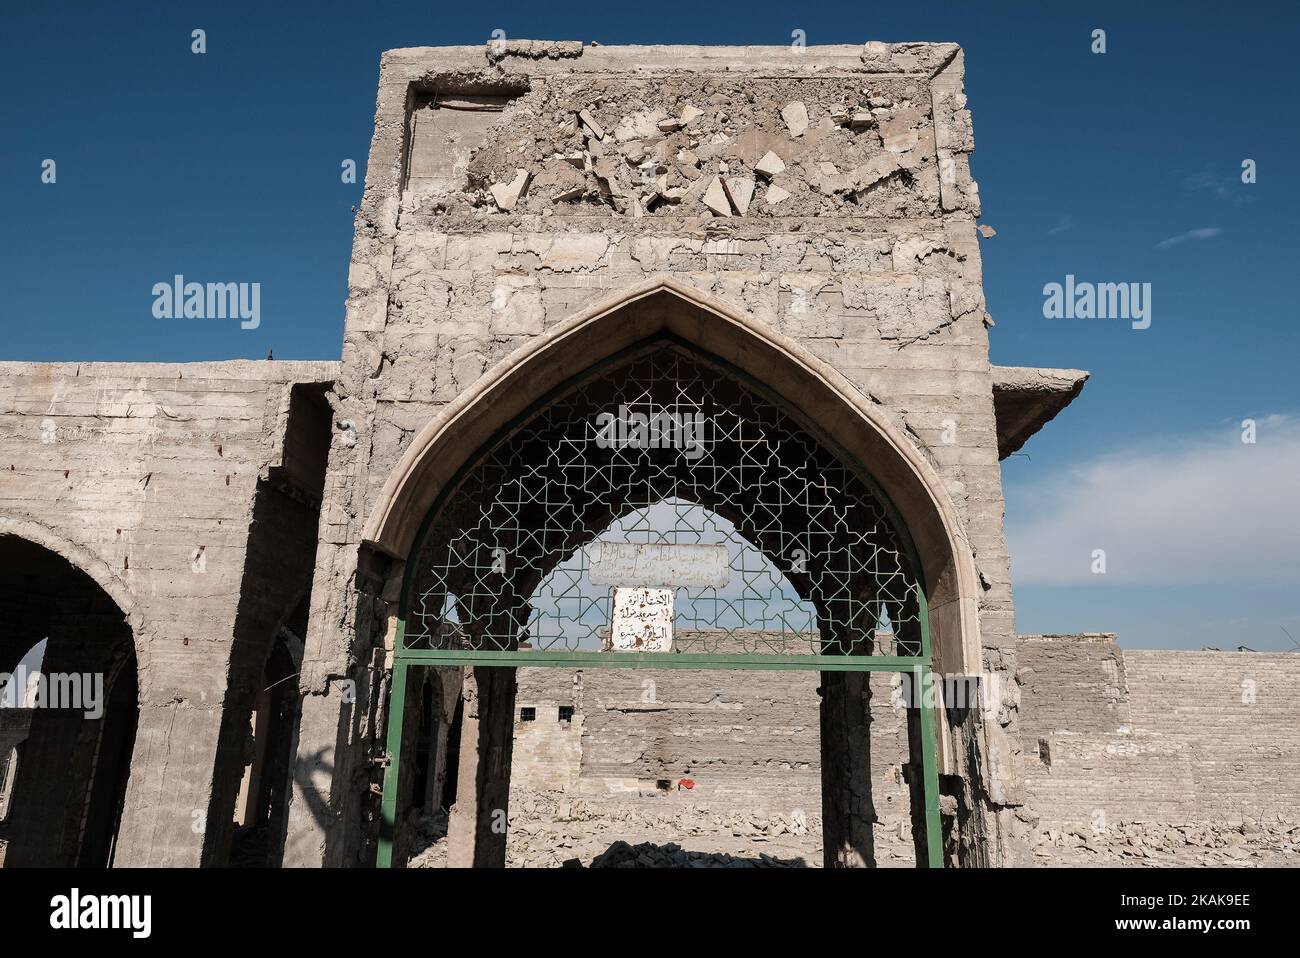 MOSUL, IRAQ - JANUARY 18, 2017 - Iraqi security forces (ISF), backed up by US-led coalition warplanes and military advisors, have regained more areas from the ISIS terrorist group inside the major Iraqi city of Mosul in the province of Nineveh. Among them Al Nabi Yunus Mosque.The Nabi Yunus shrine called also JonahÂ’s tomb which was built on the reputed burial site of a prophet known in the Koran as Yunus and in the Bible as Jonah was a popular pilgrimage site. In July 2014, weeks after overrunning Mosul and much of IraqÂ’s Sunni Arab heartland, IS militants rigged the shrine and blew it up. ( Stock Photo